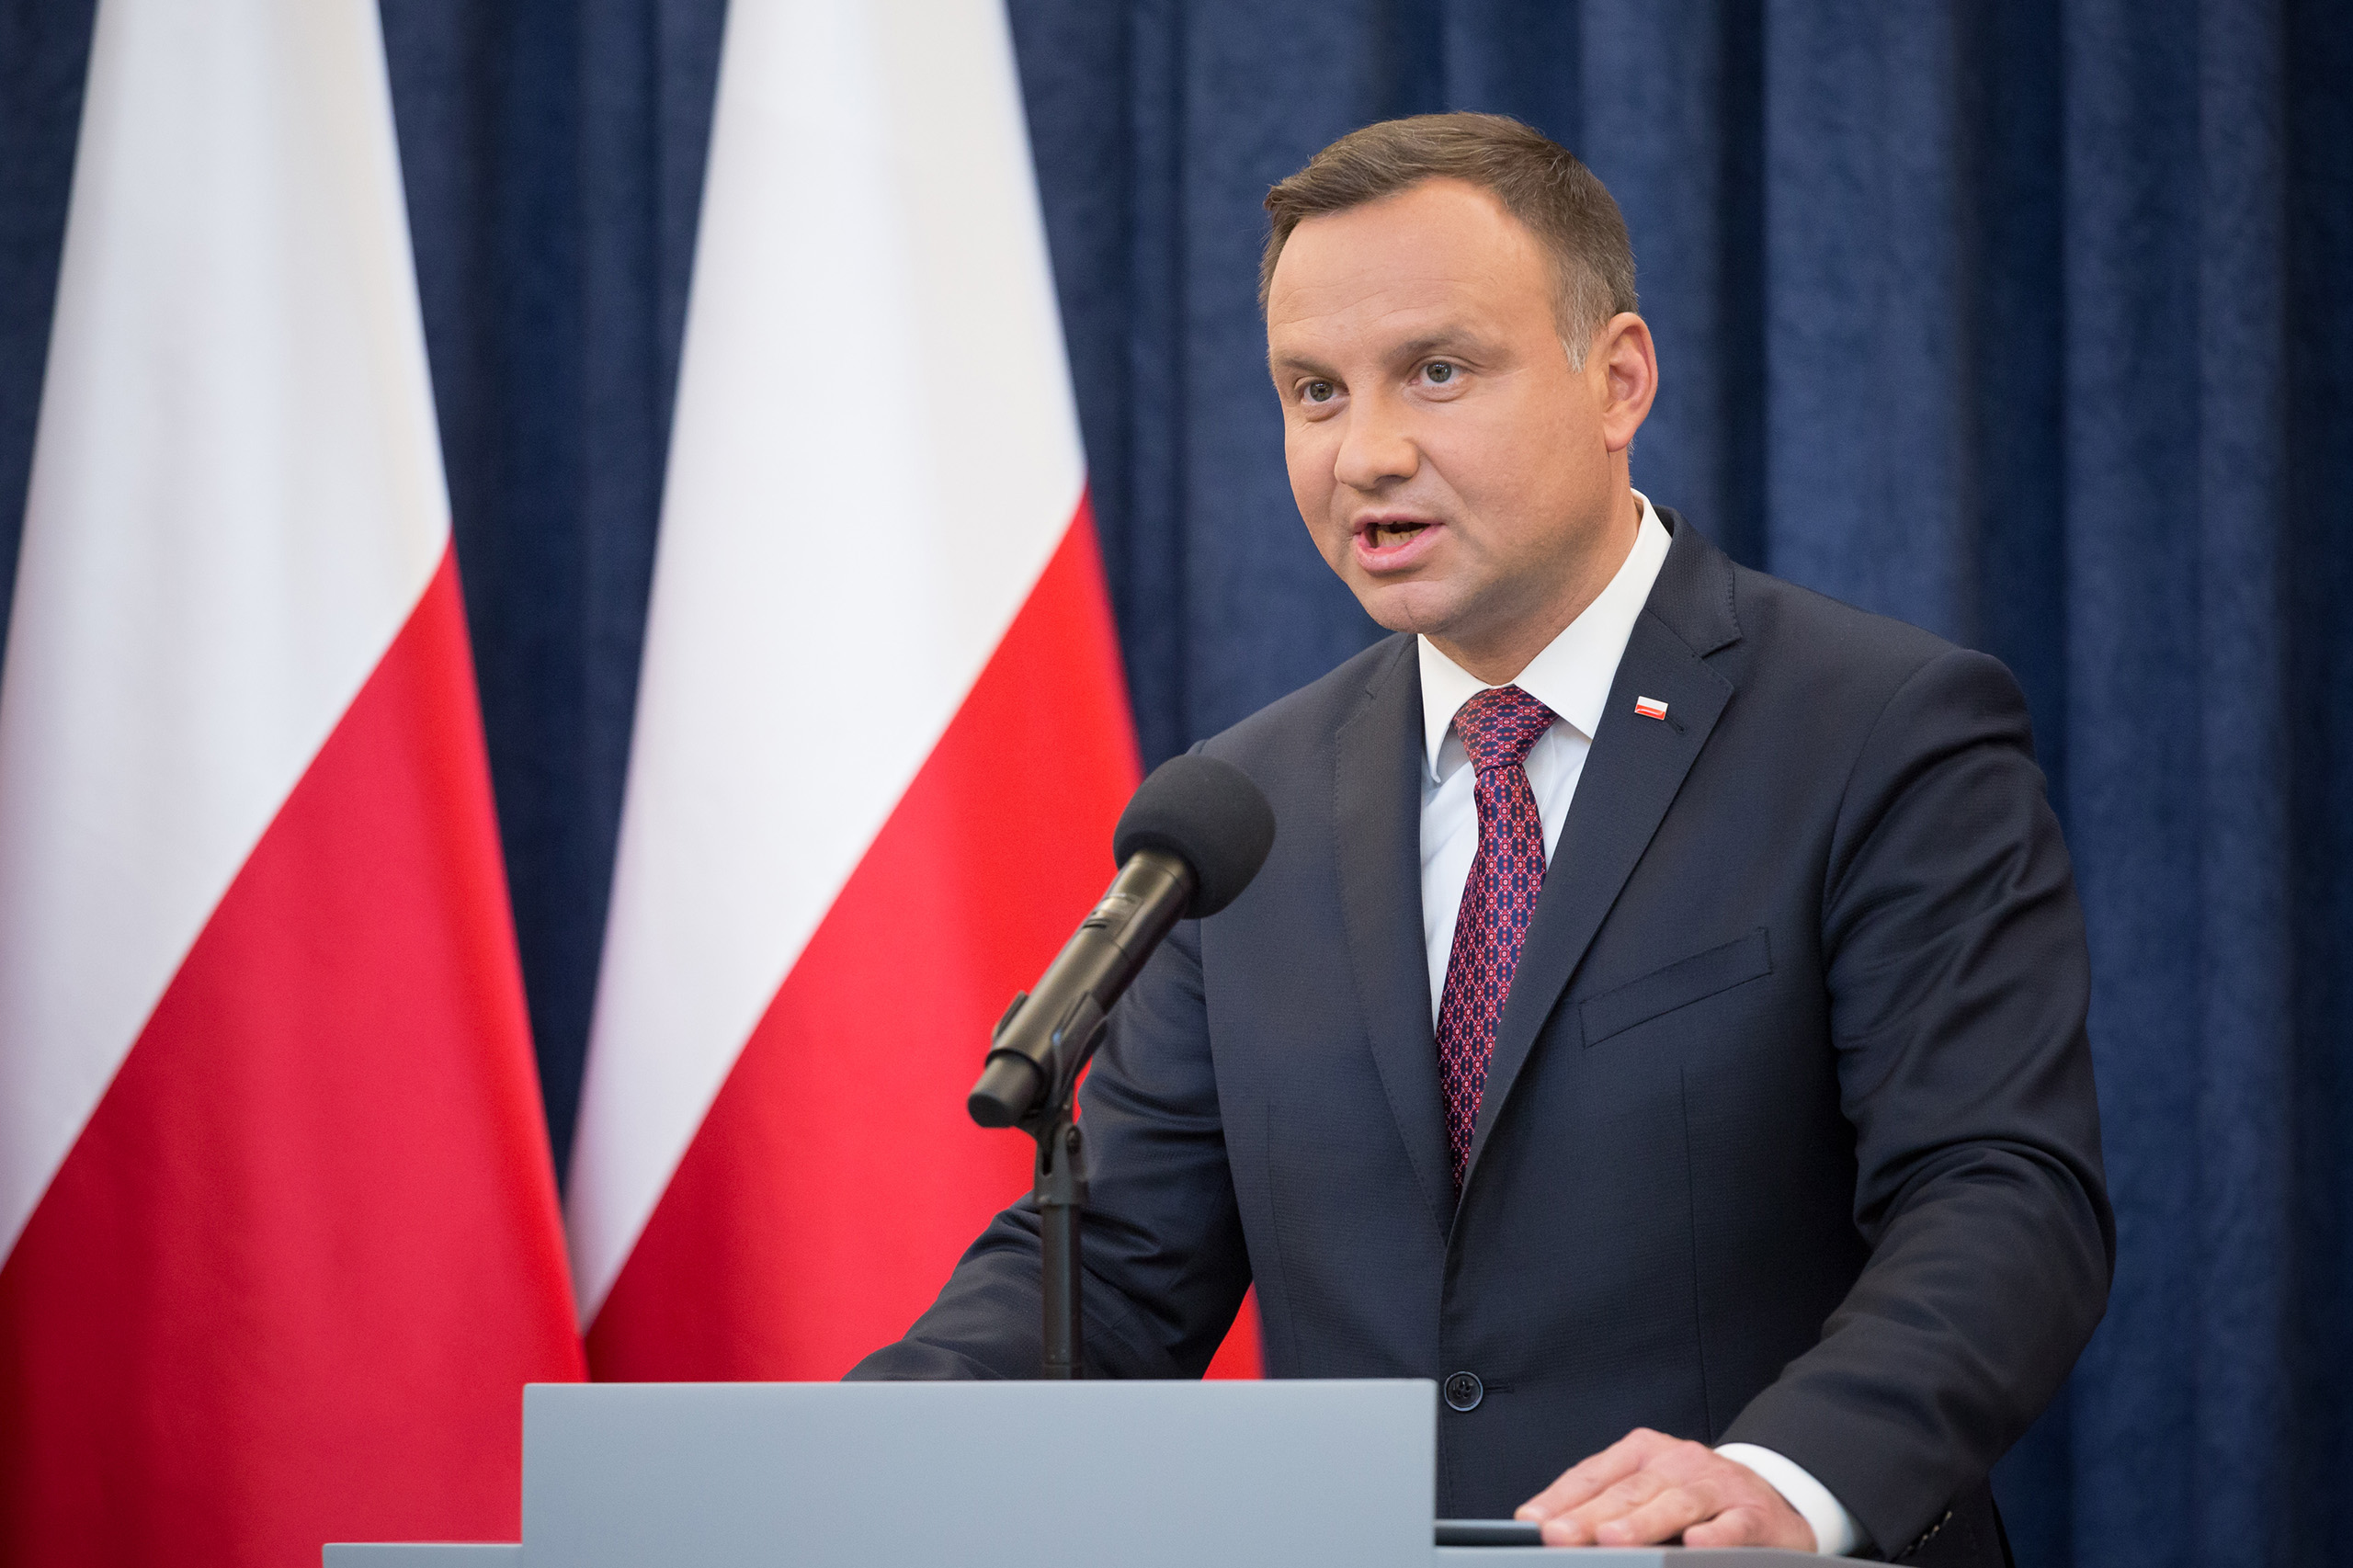 President of Poland, Andrzej Duda, makes a statement about changes in the judicial law and Supreme Court at Presidential Palace in Warsaw, Poland on July 18, 2017. (Mateusz Wlodarczyk—NurPhoto/Getty Images)